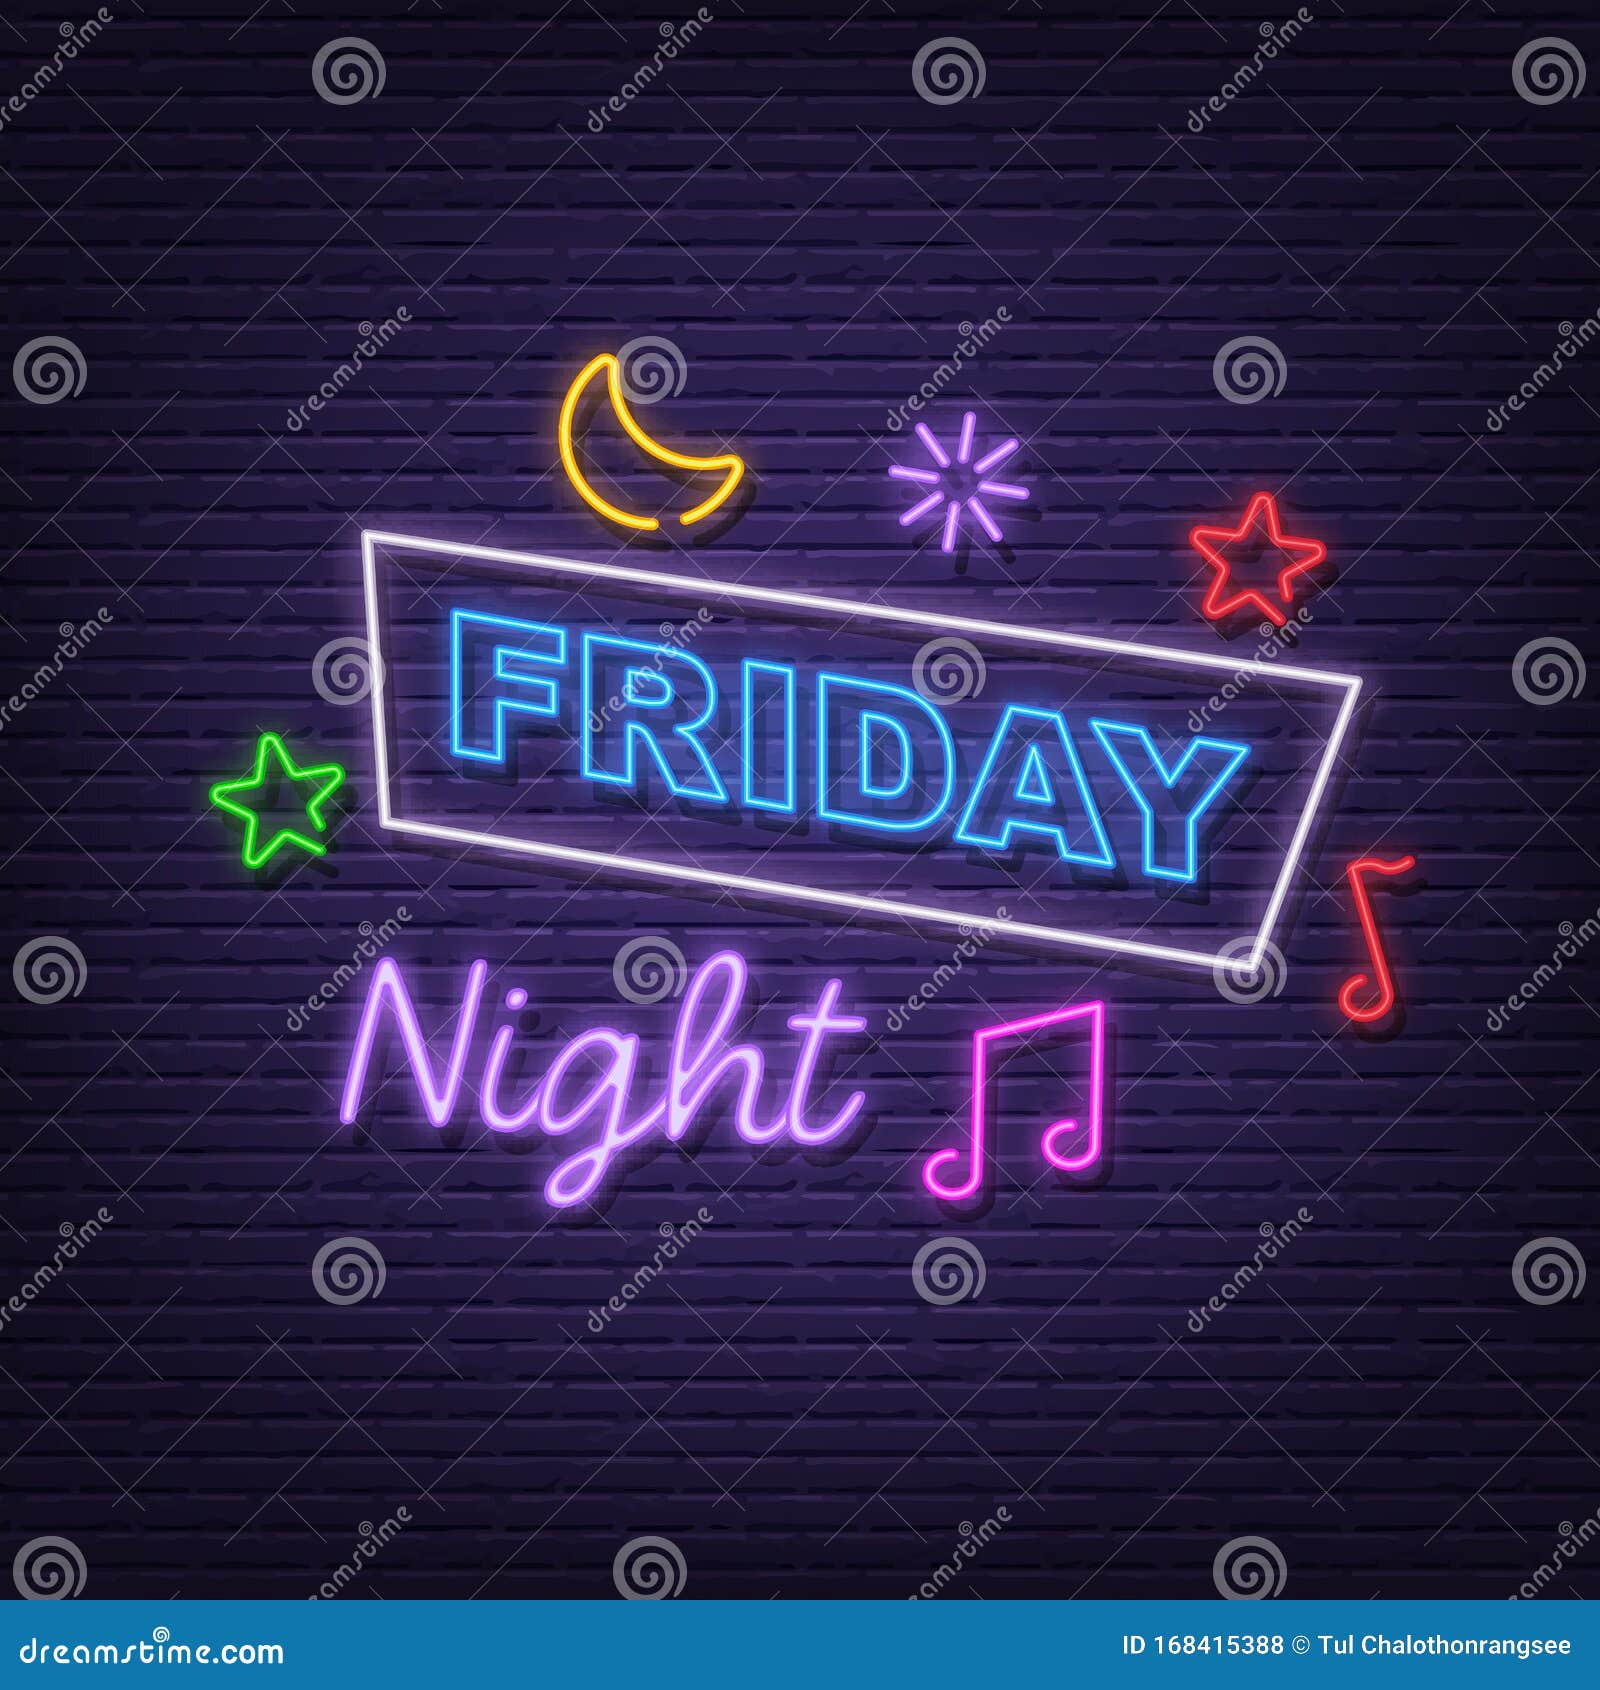 Neon sign, the word Friday Night. Vector illustration. Stock Vector